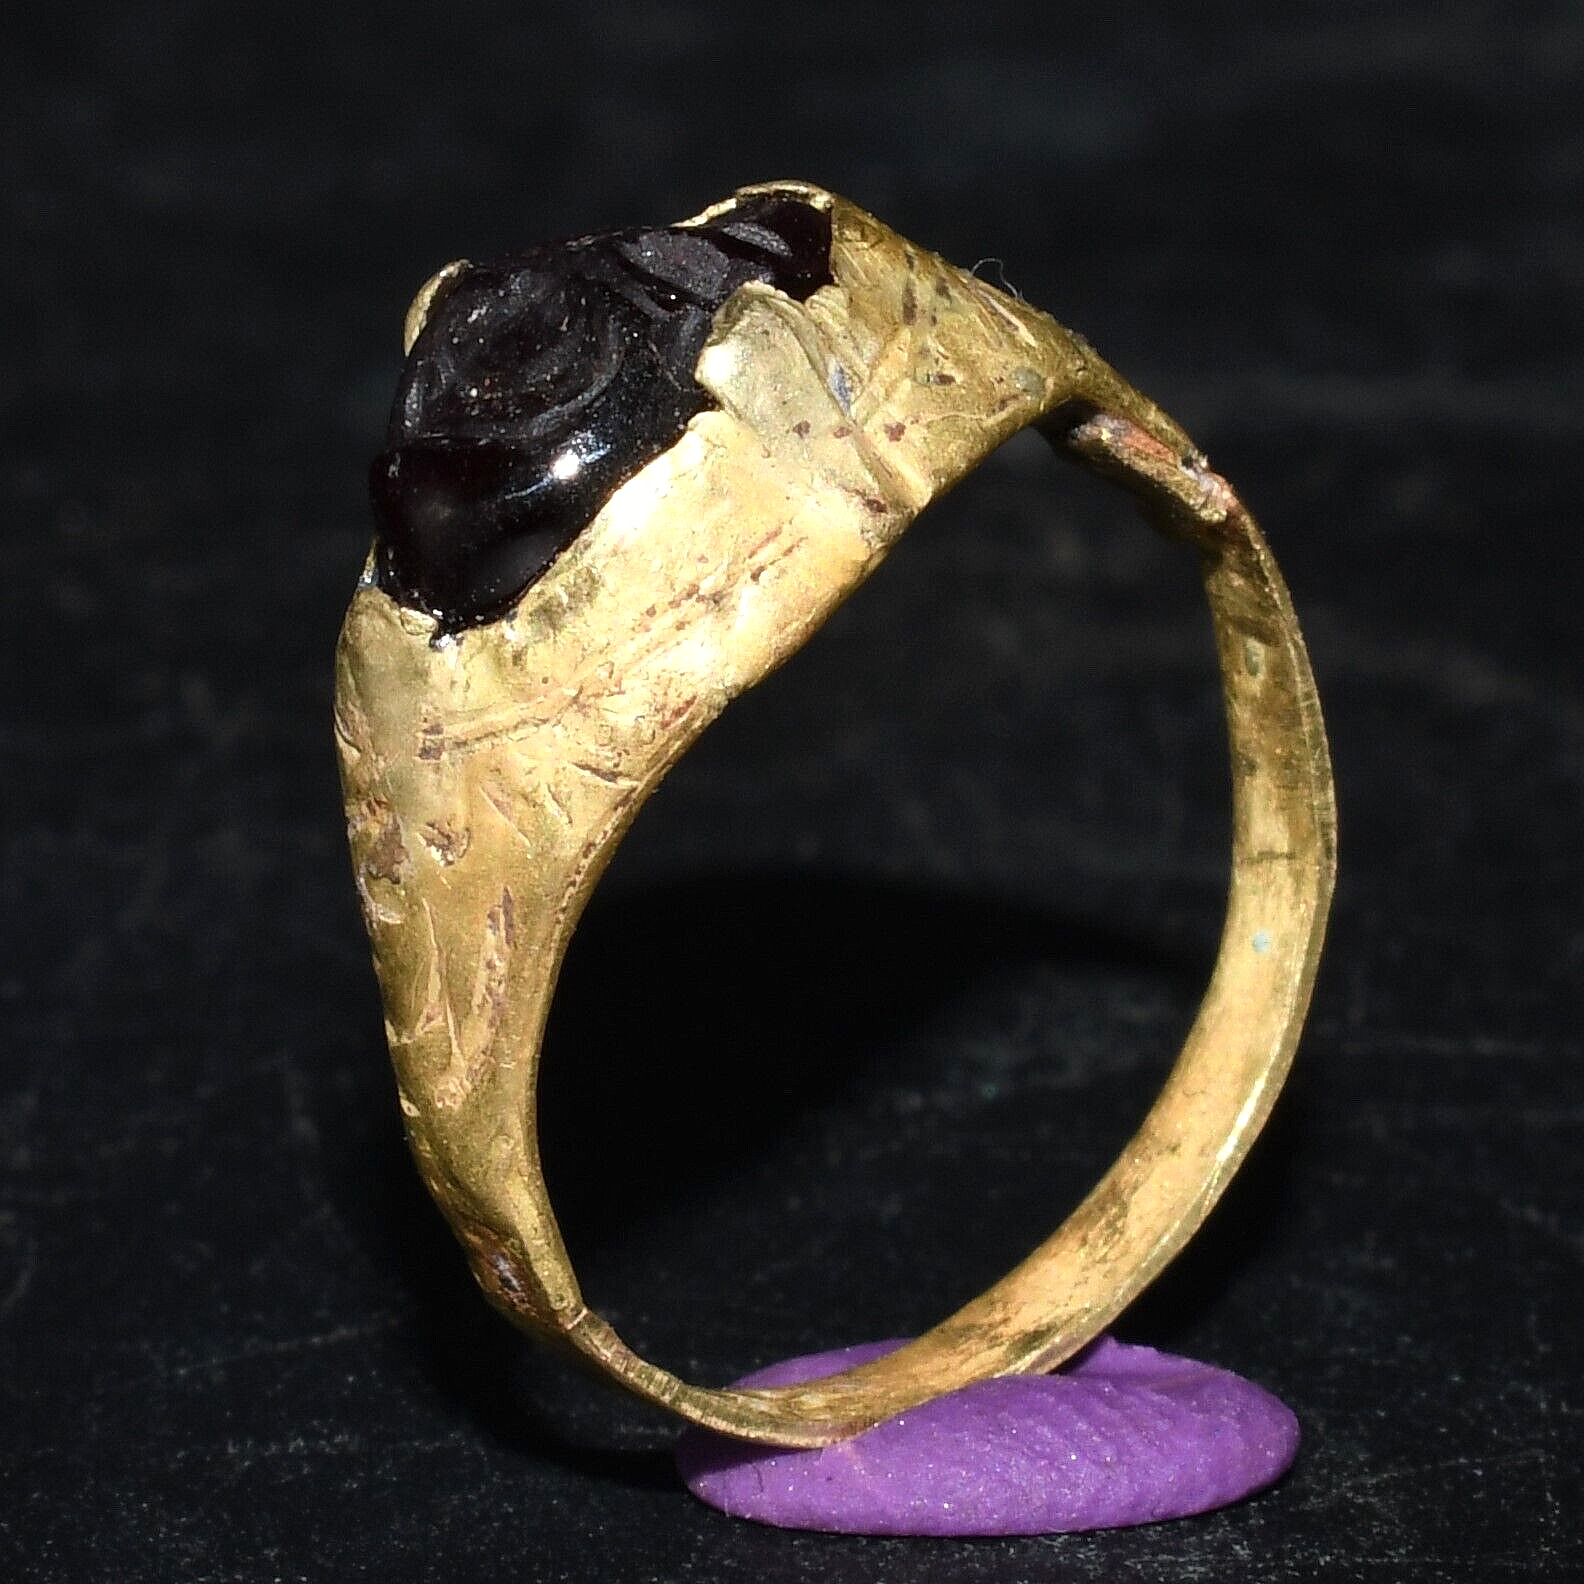 Authentic Ancient Roman Solid Gold Ring with Garnet Intaglio in good Condition